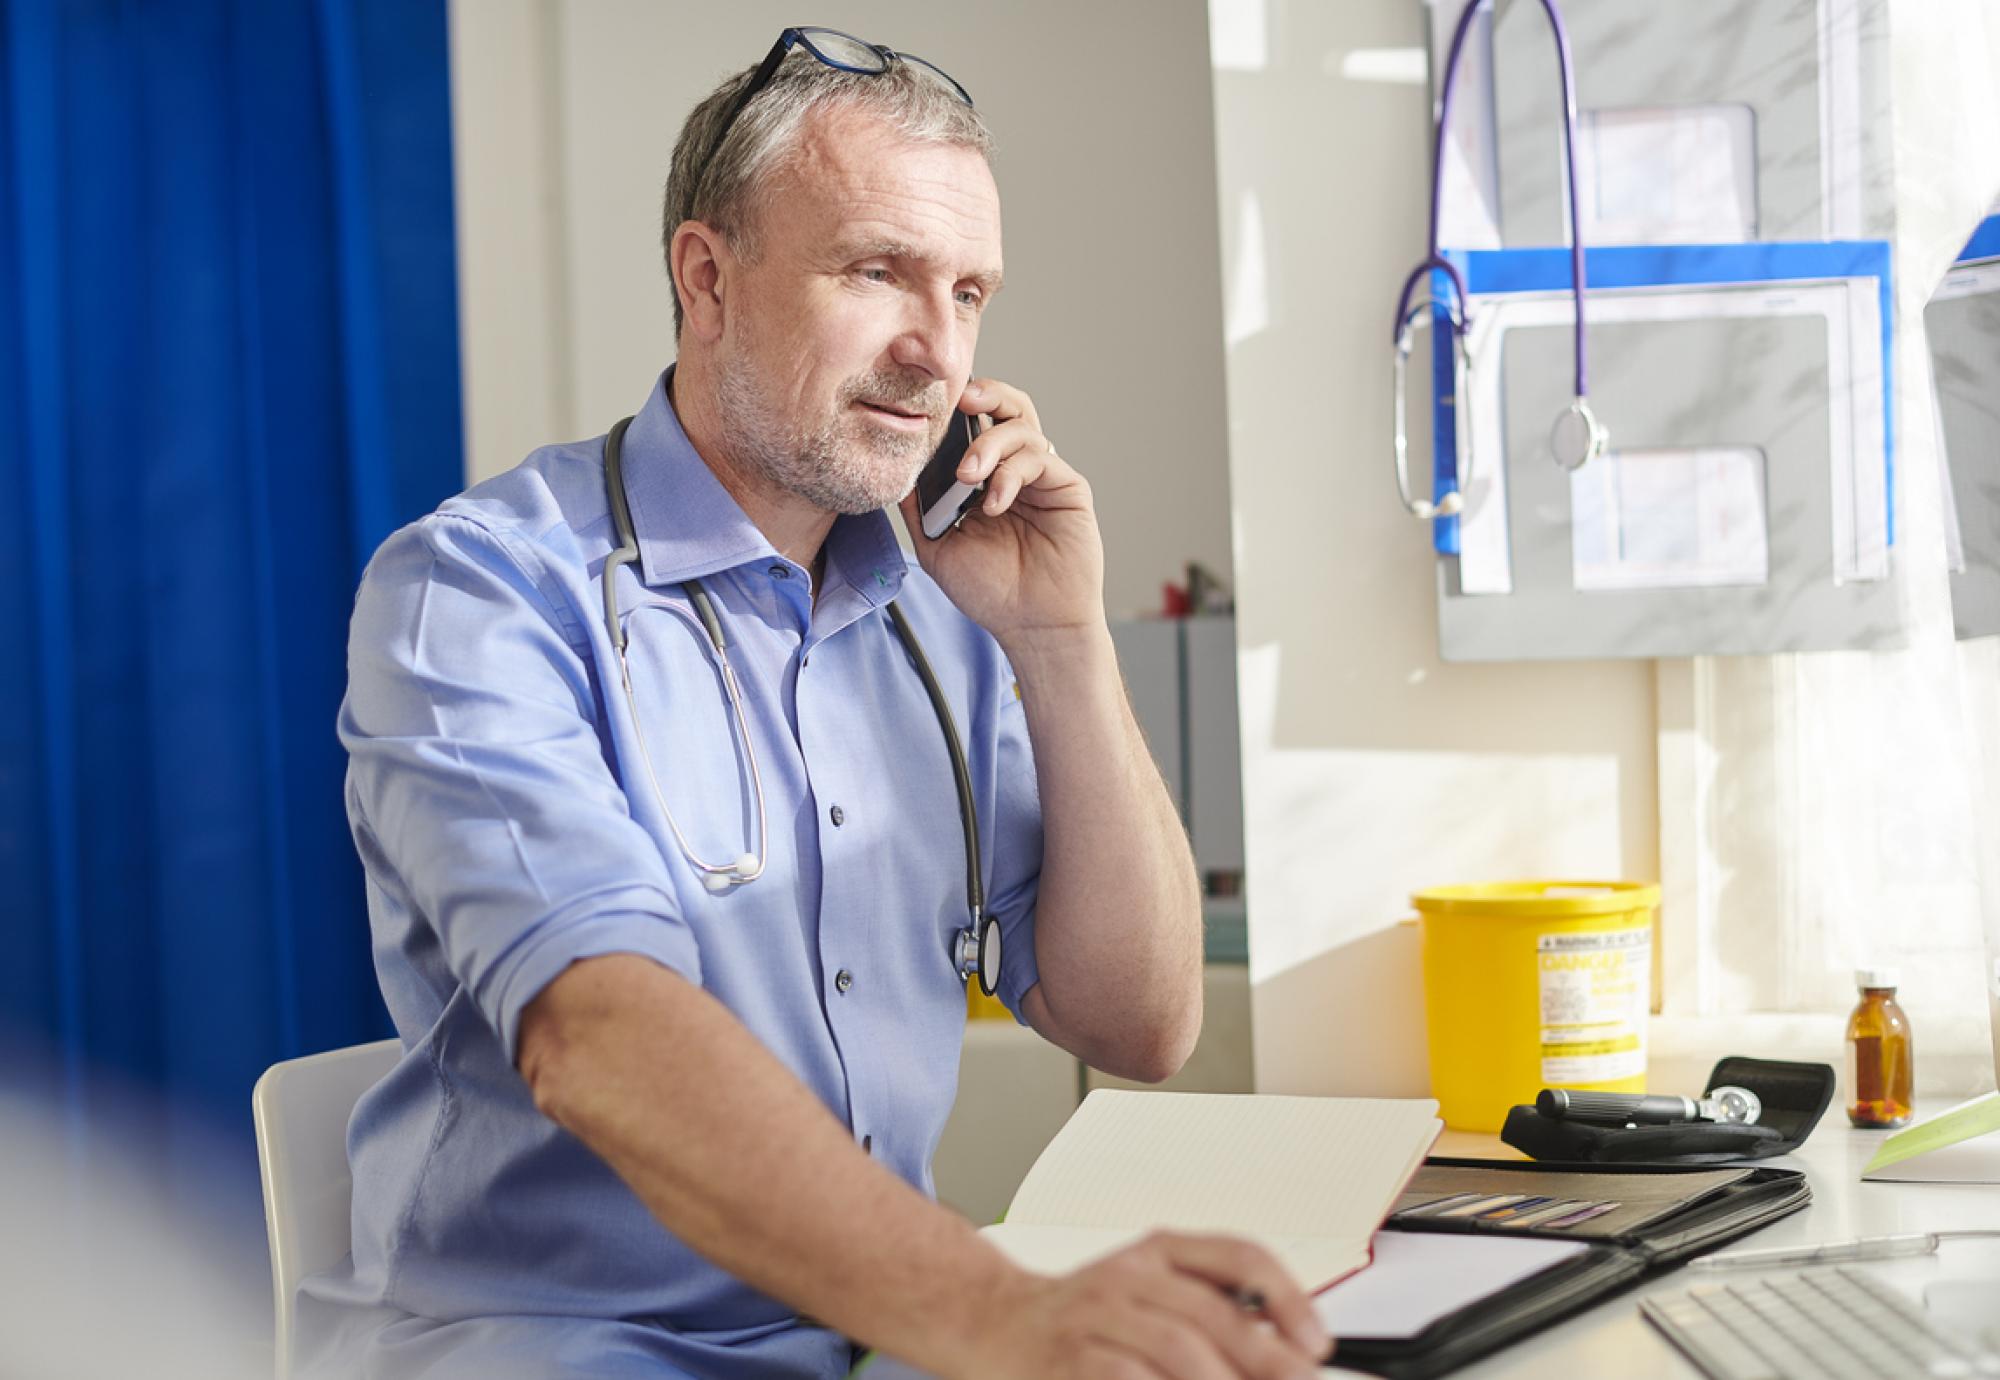 Doctor on the phone depicting new digital transformation upgrade for GP practices